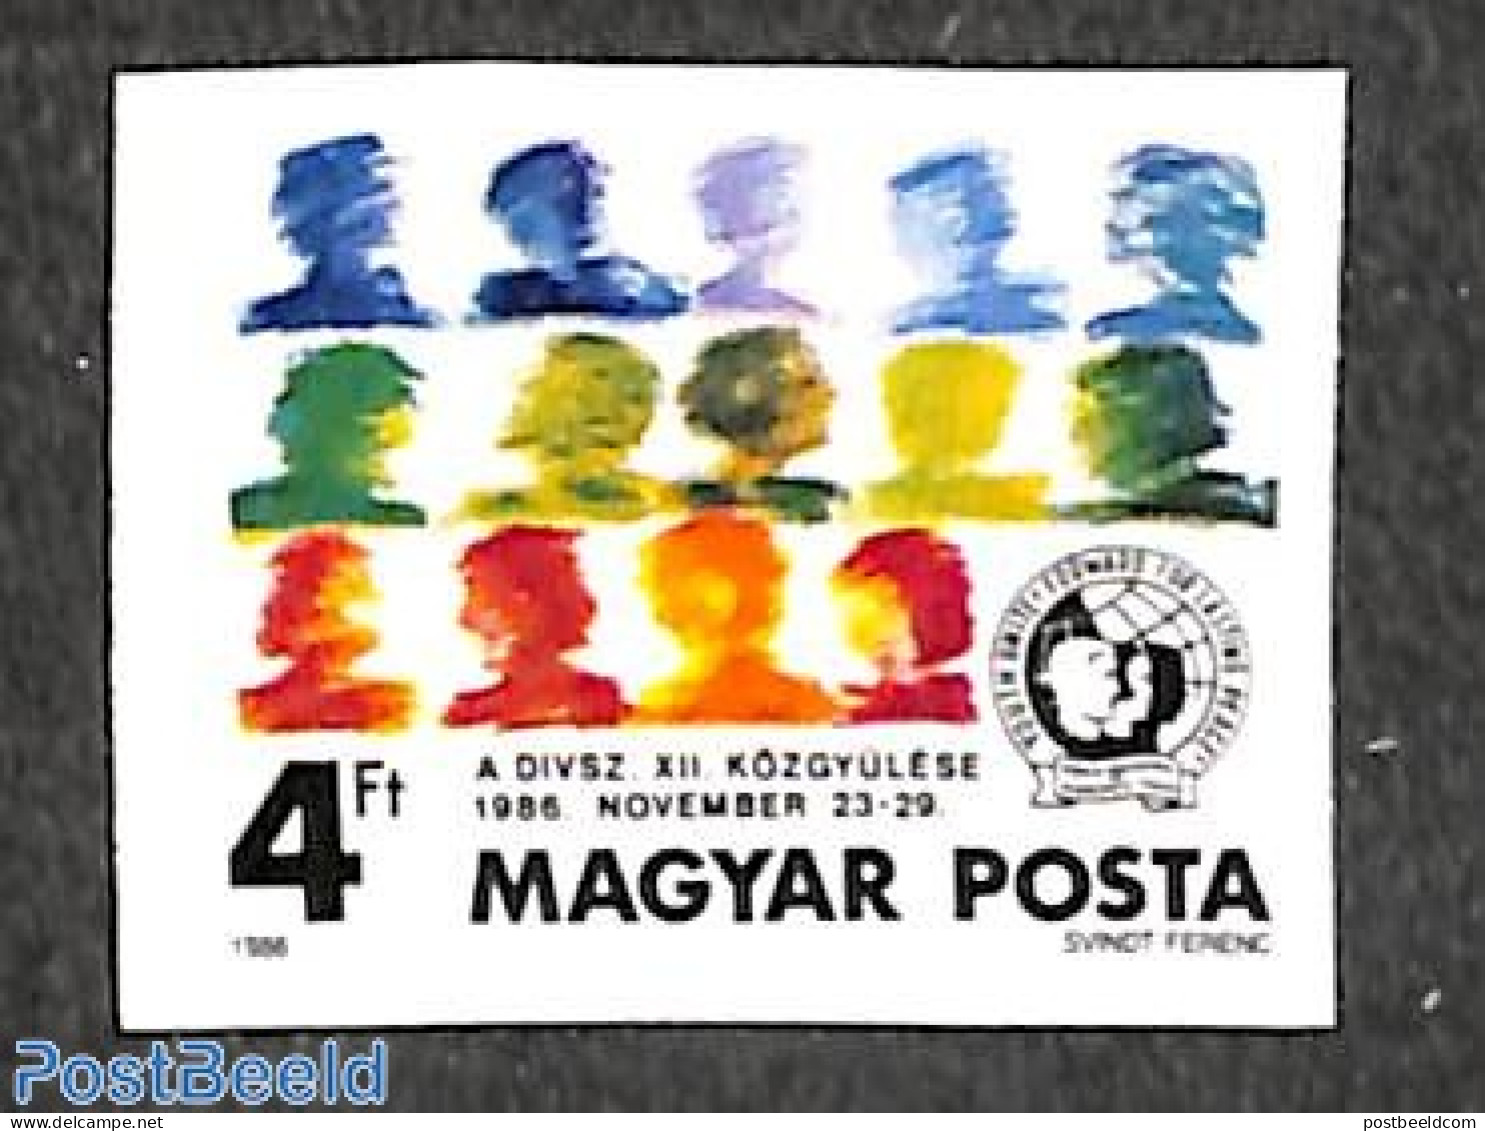 Hungary 1986 World Youth Association 1v Imperforated, Mint NH - Unused Stamps